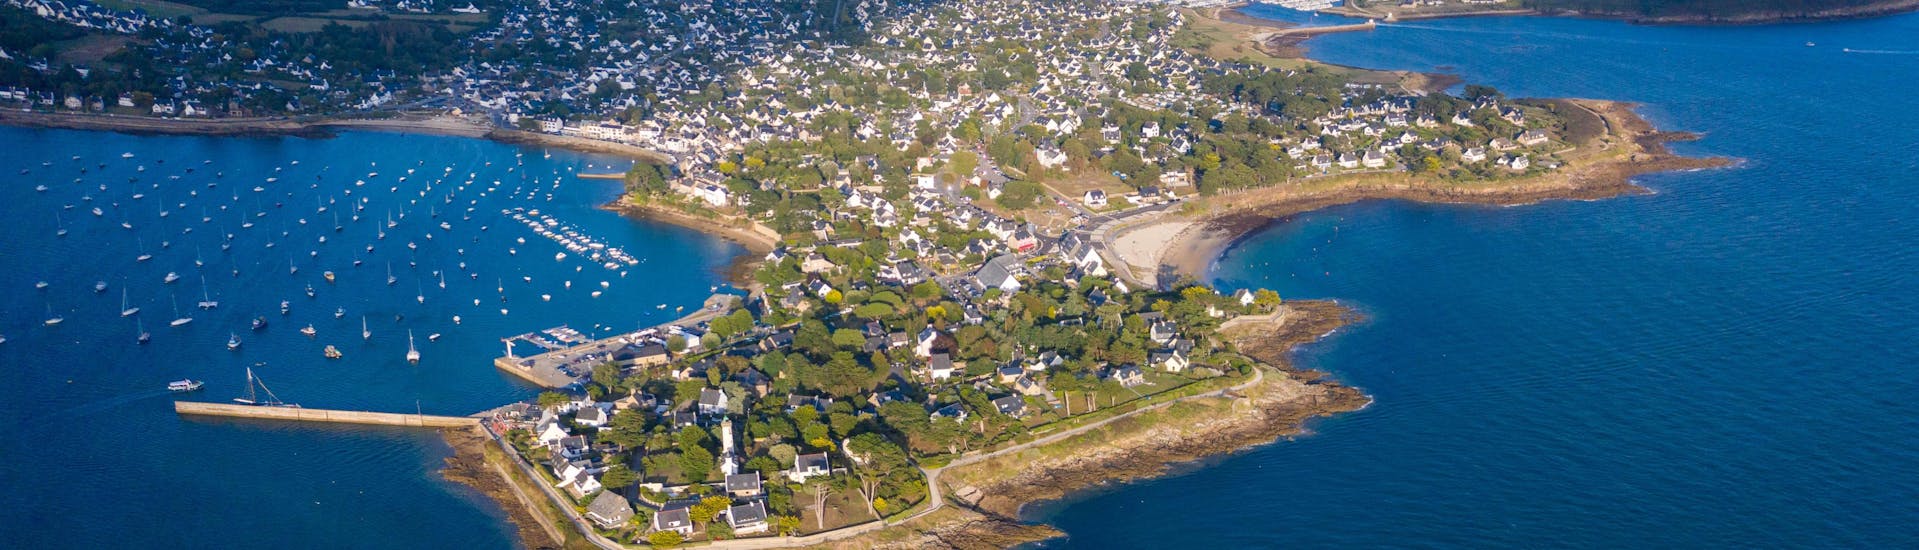 Aerial view of the city of Arzon, near the Gulf of Morbihan.